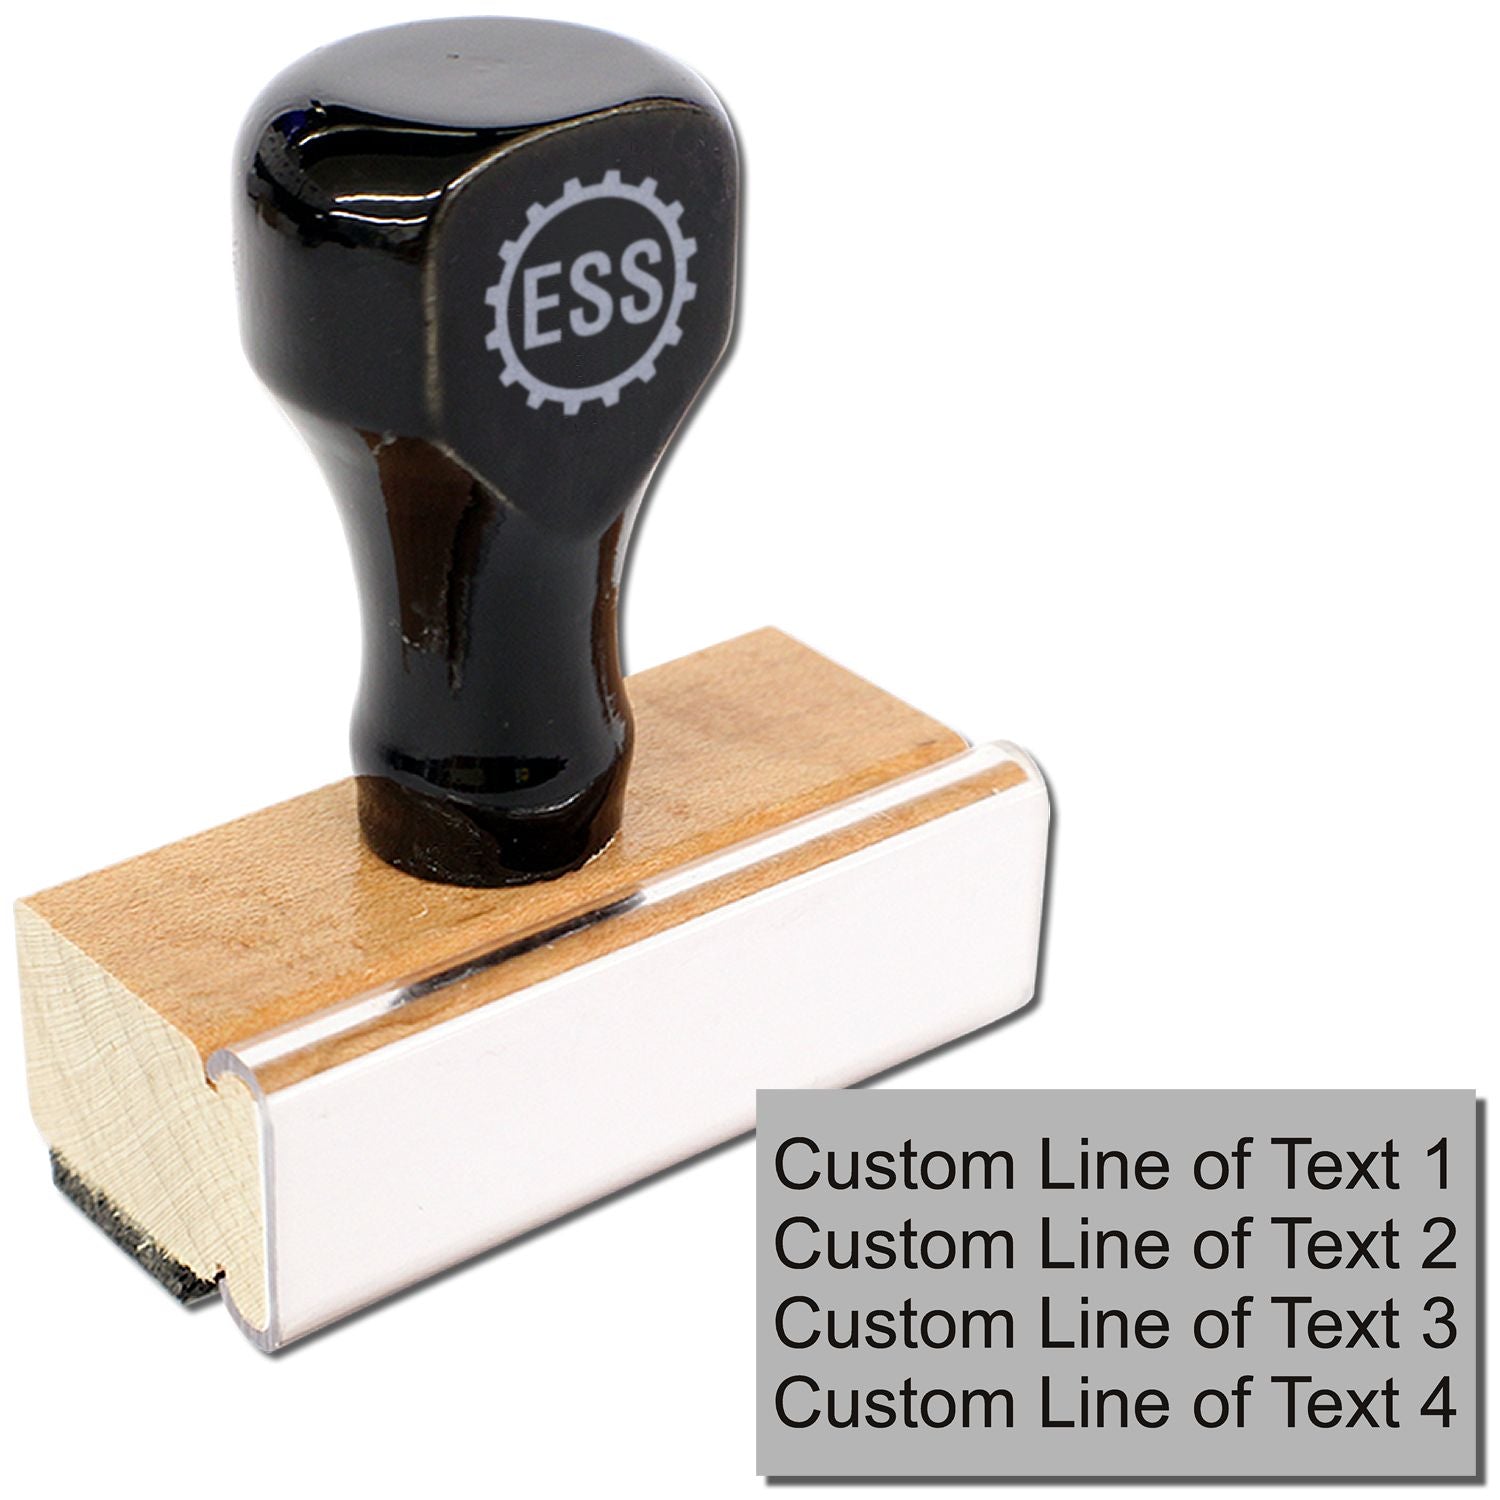 1 2 3 4 Large Logo Stamp - Custom Stamp - Personalized Wood Handle Business Stamp Self-Inking Black Red Blue Black Ink - Custom Round Text